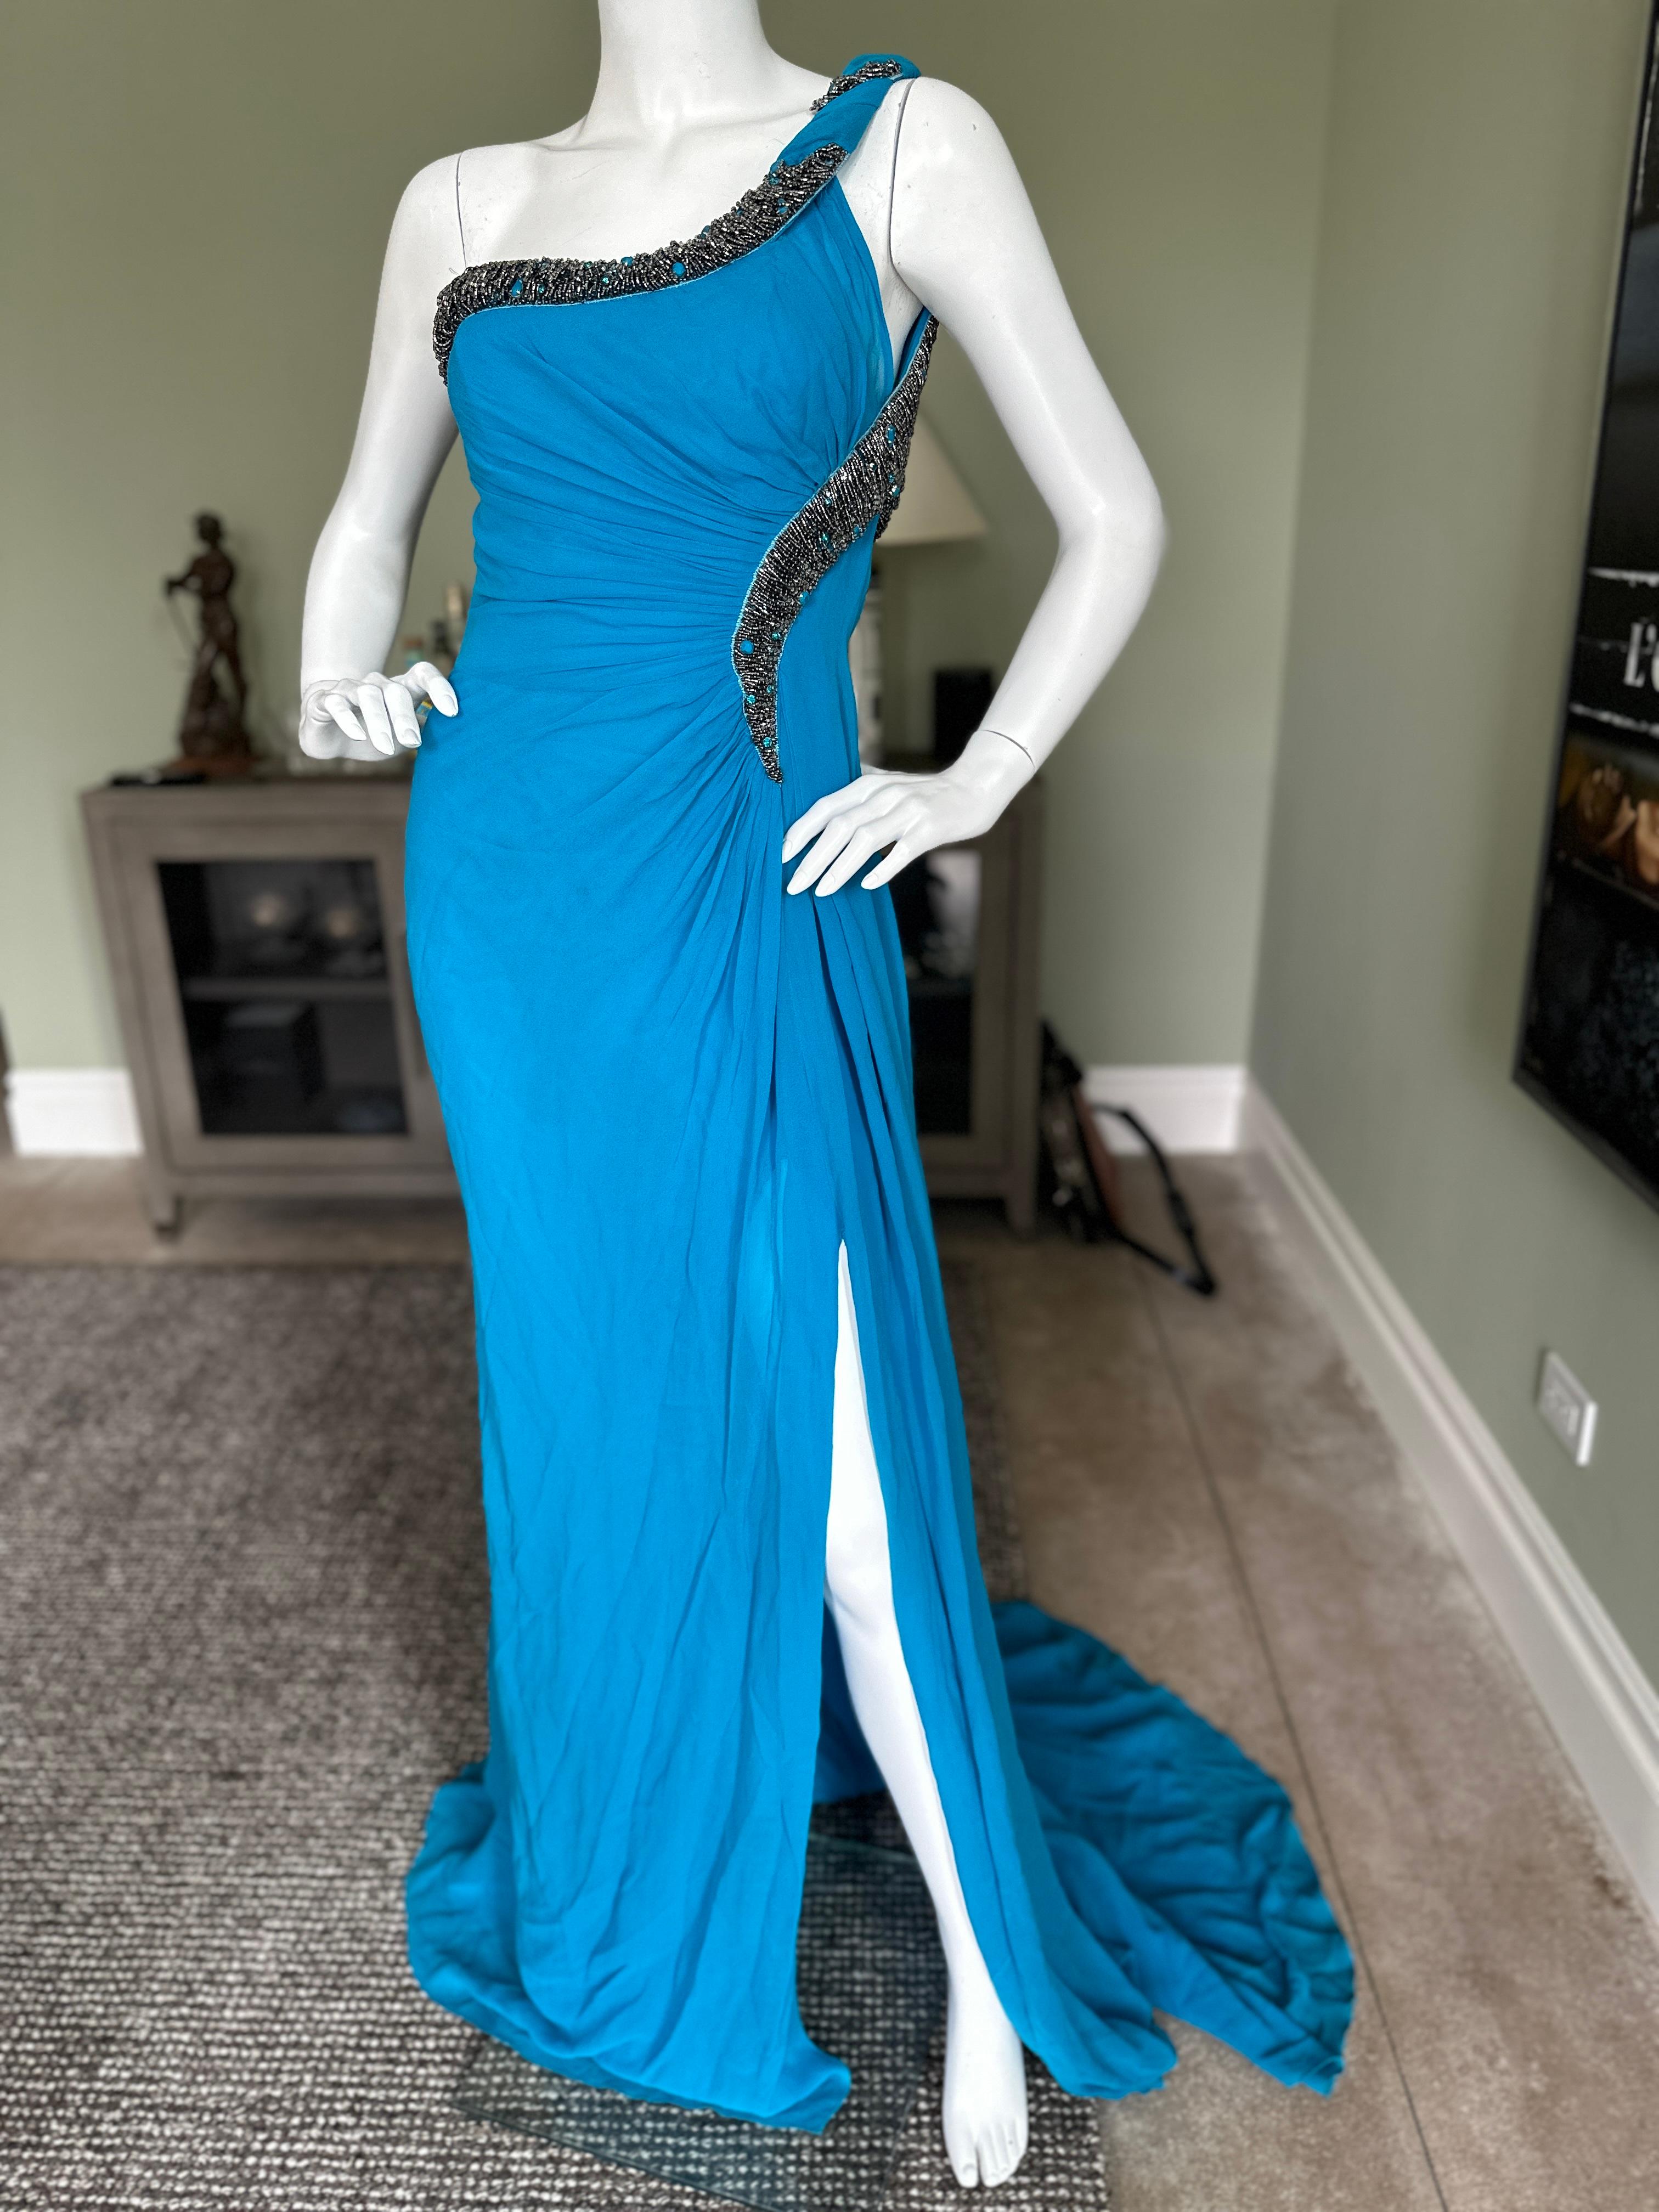 Roberto Cavalli Vintage Blue Beaded One Shoulder Goddess Dress with Train
Simply sensational, please use the zoom feature to see details
 Size 42
 Bust 36